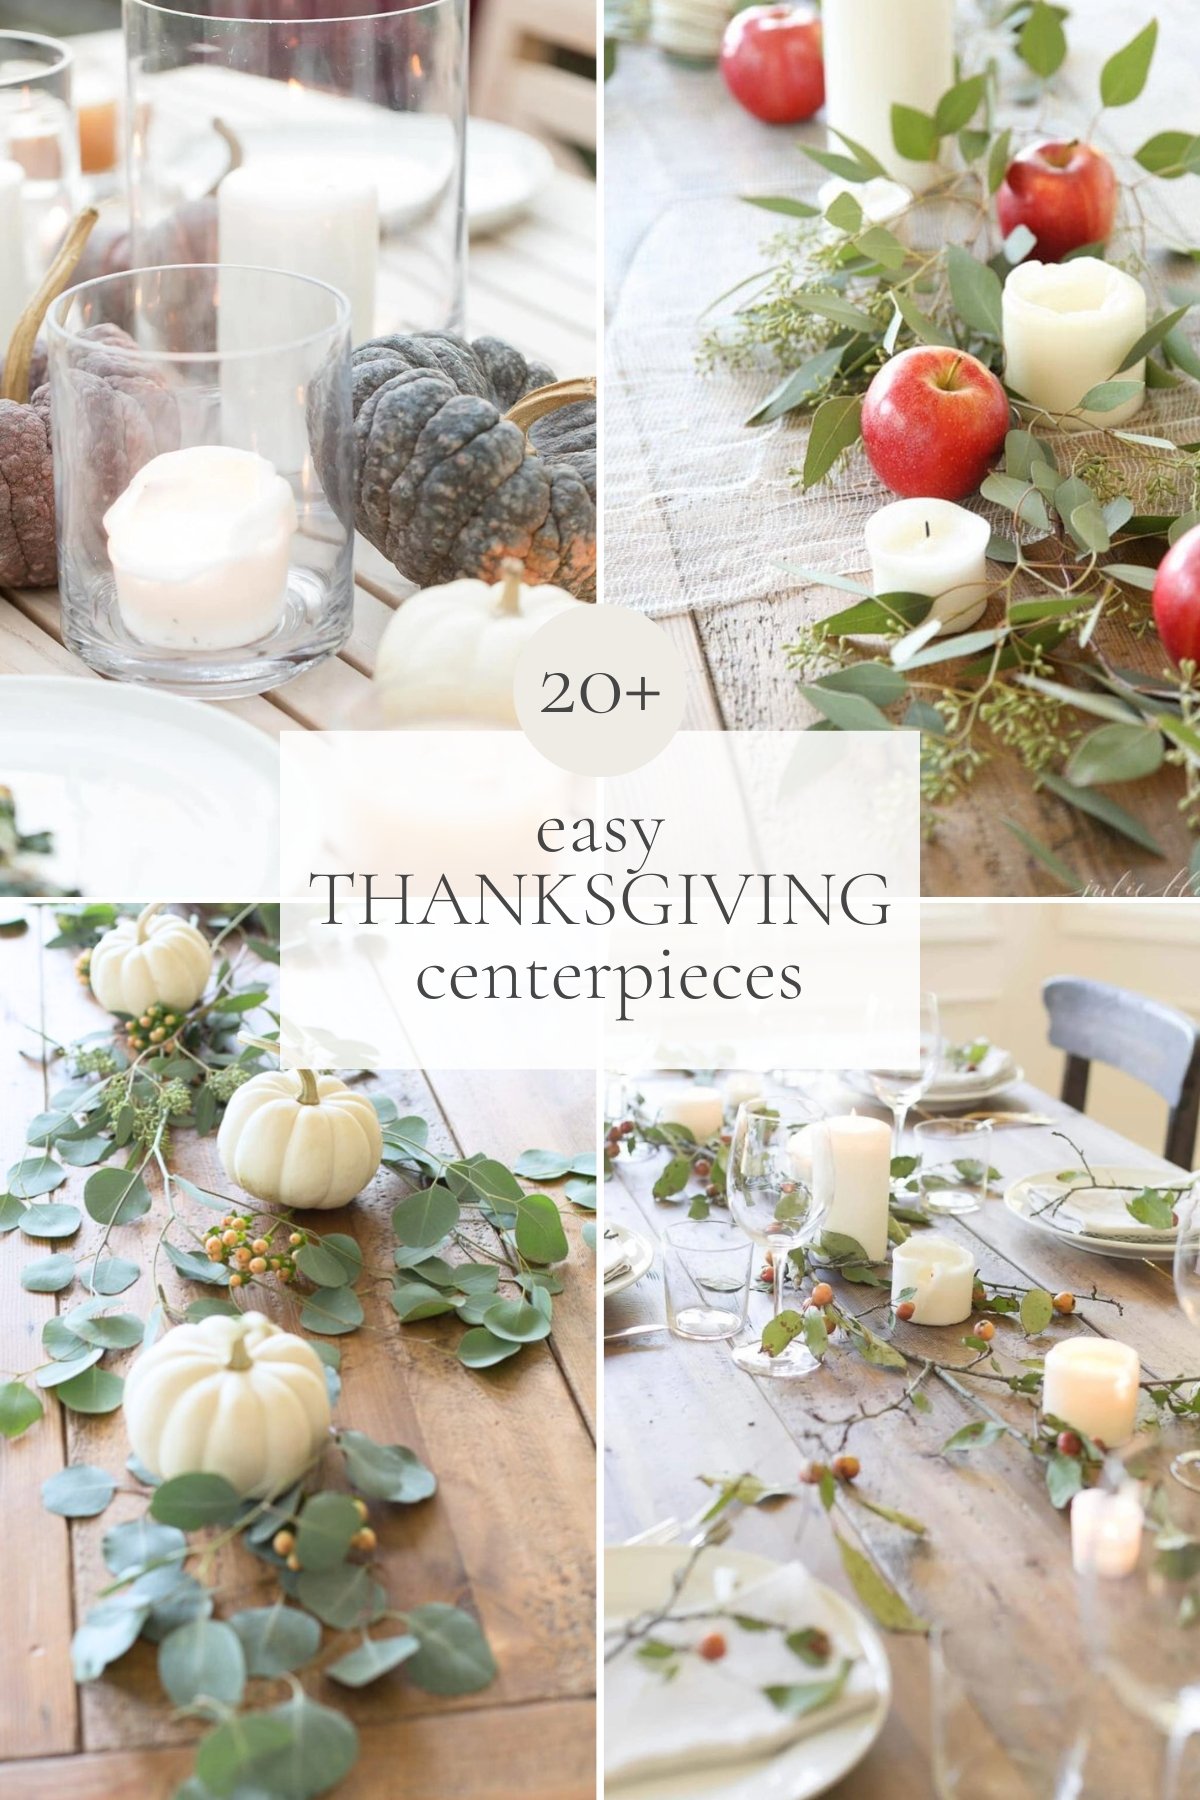 Get ready for the holiday season with these 20 easy Thanksgiving centerpieces. Transform your Thanksgiving table into a stunning display of Thanksgiving table decor. These beautiful Thanksgiving centerpieces will be the highlight of your festive